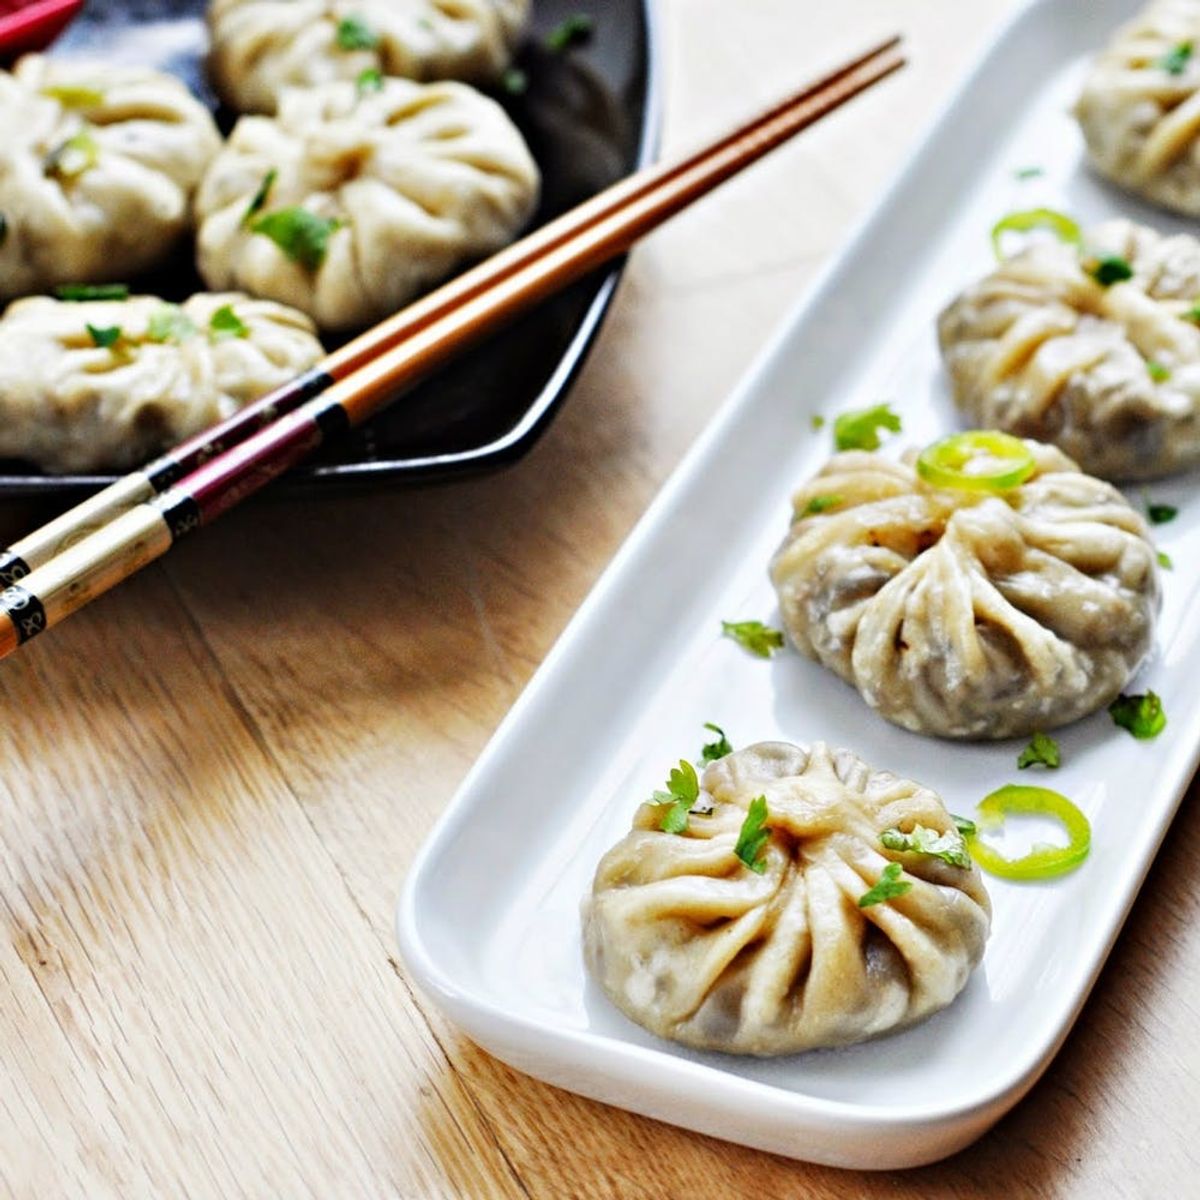 25 Dumplings for Chinese New Year and Beyond